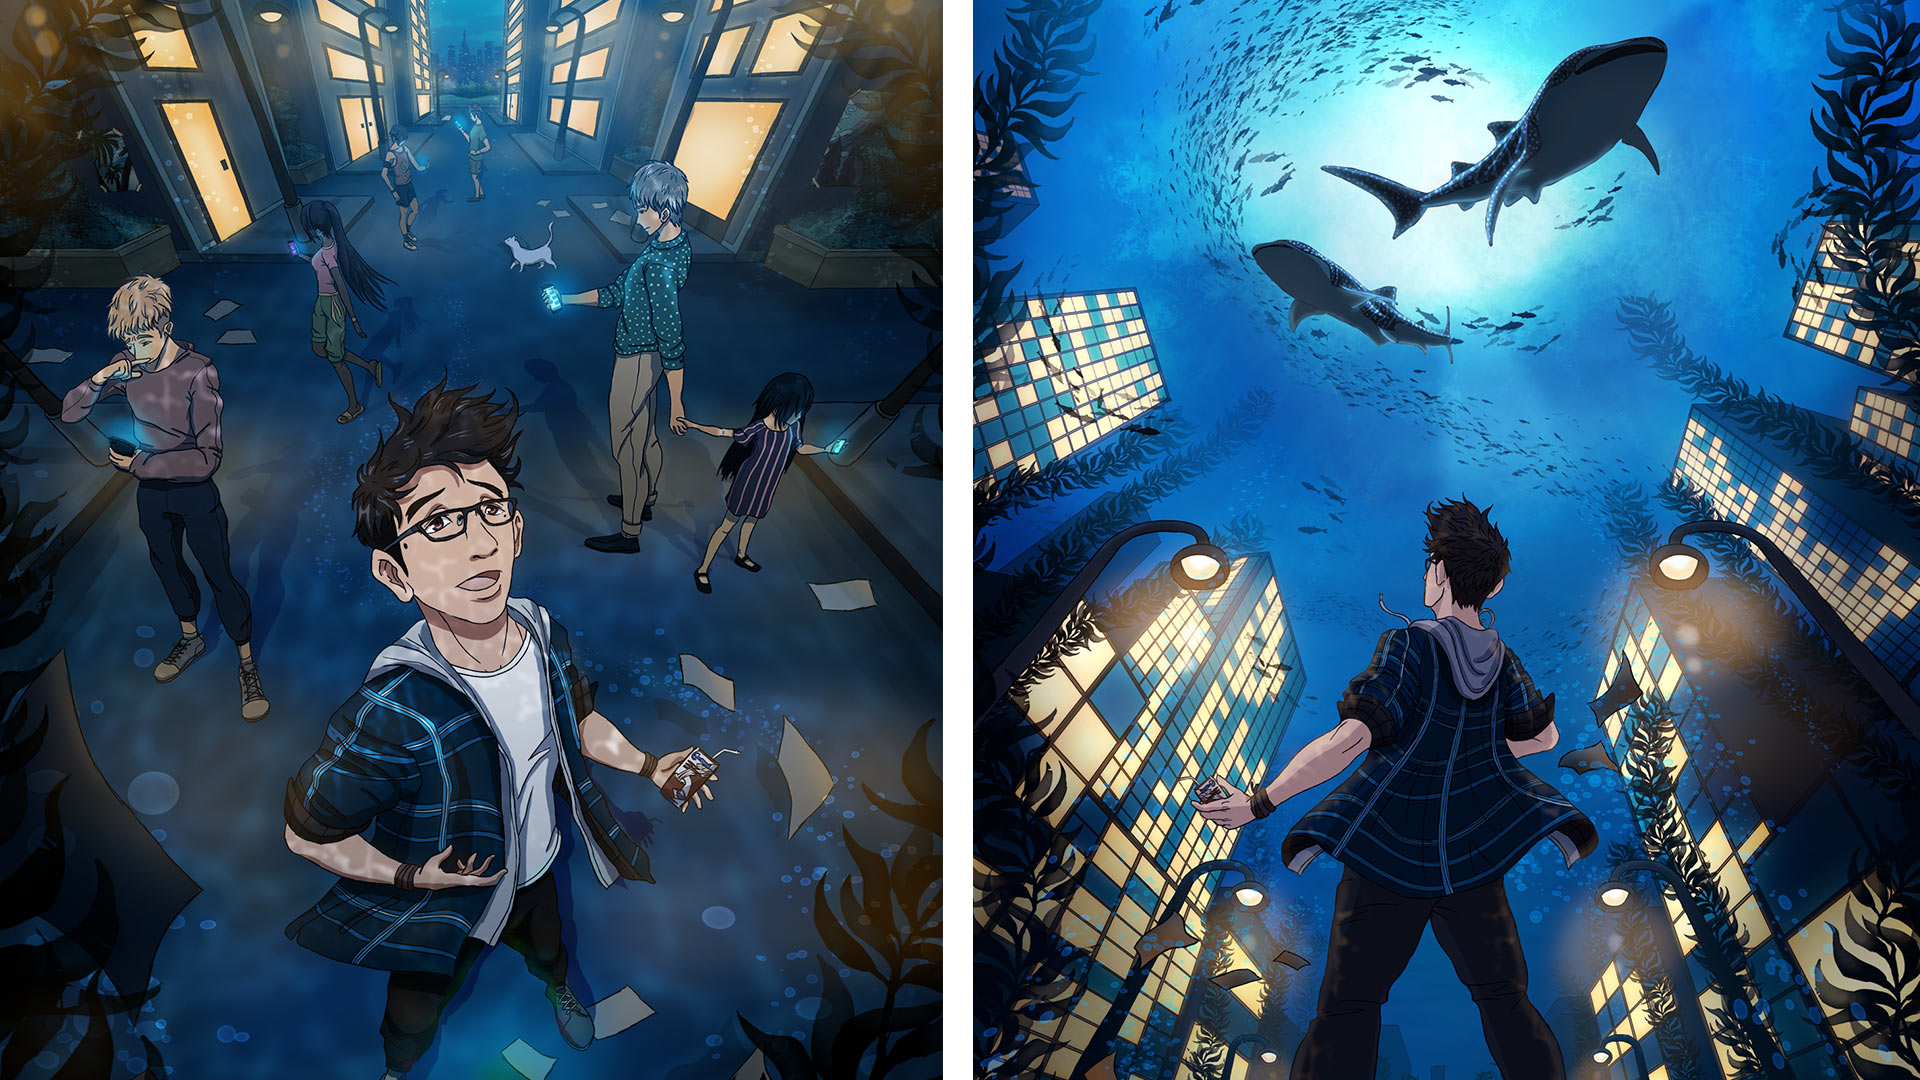 An image on the left shows people looking at their phones while one of them is looking up as paper floats with bubbles trailing behind. The right image is of a lit city with two whale sharks swimming above it.